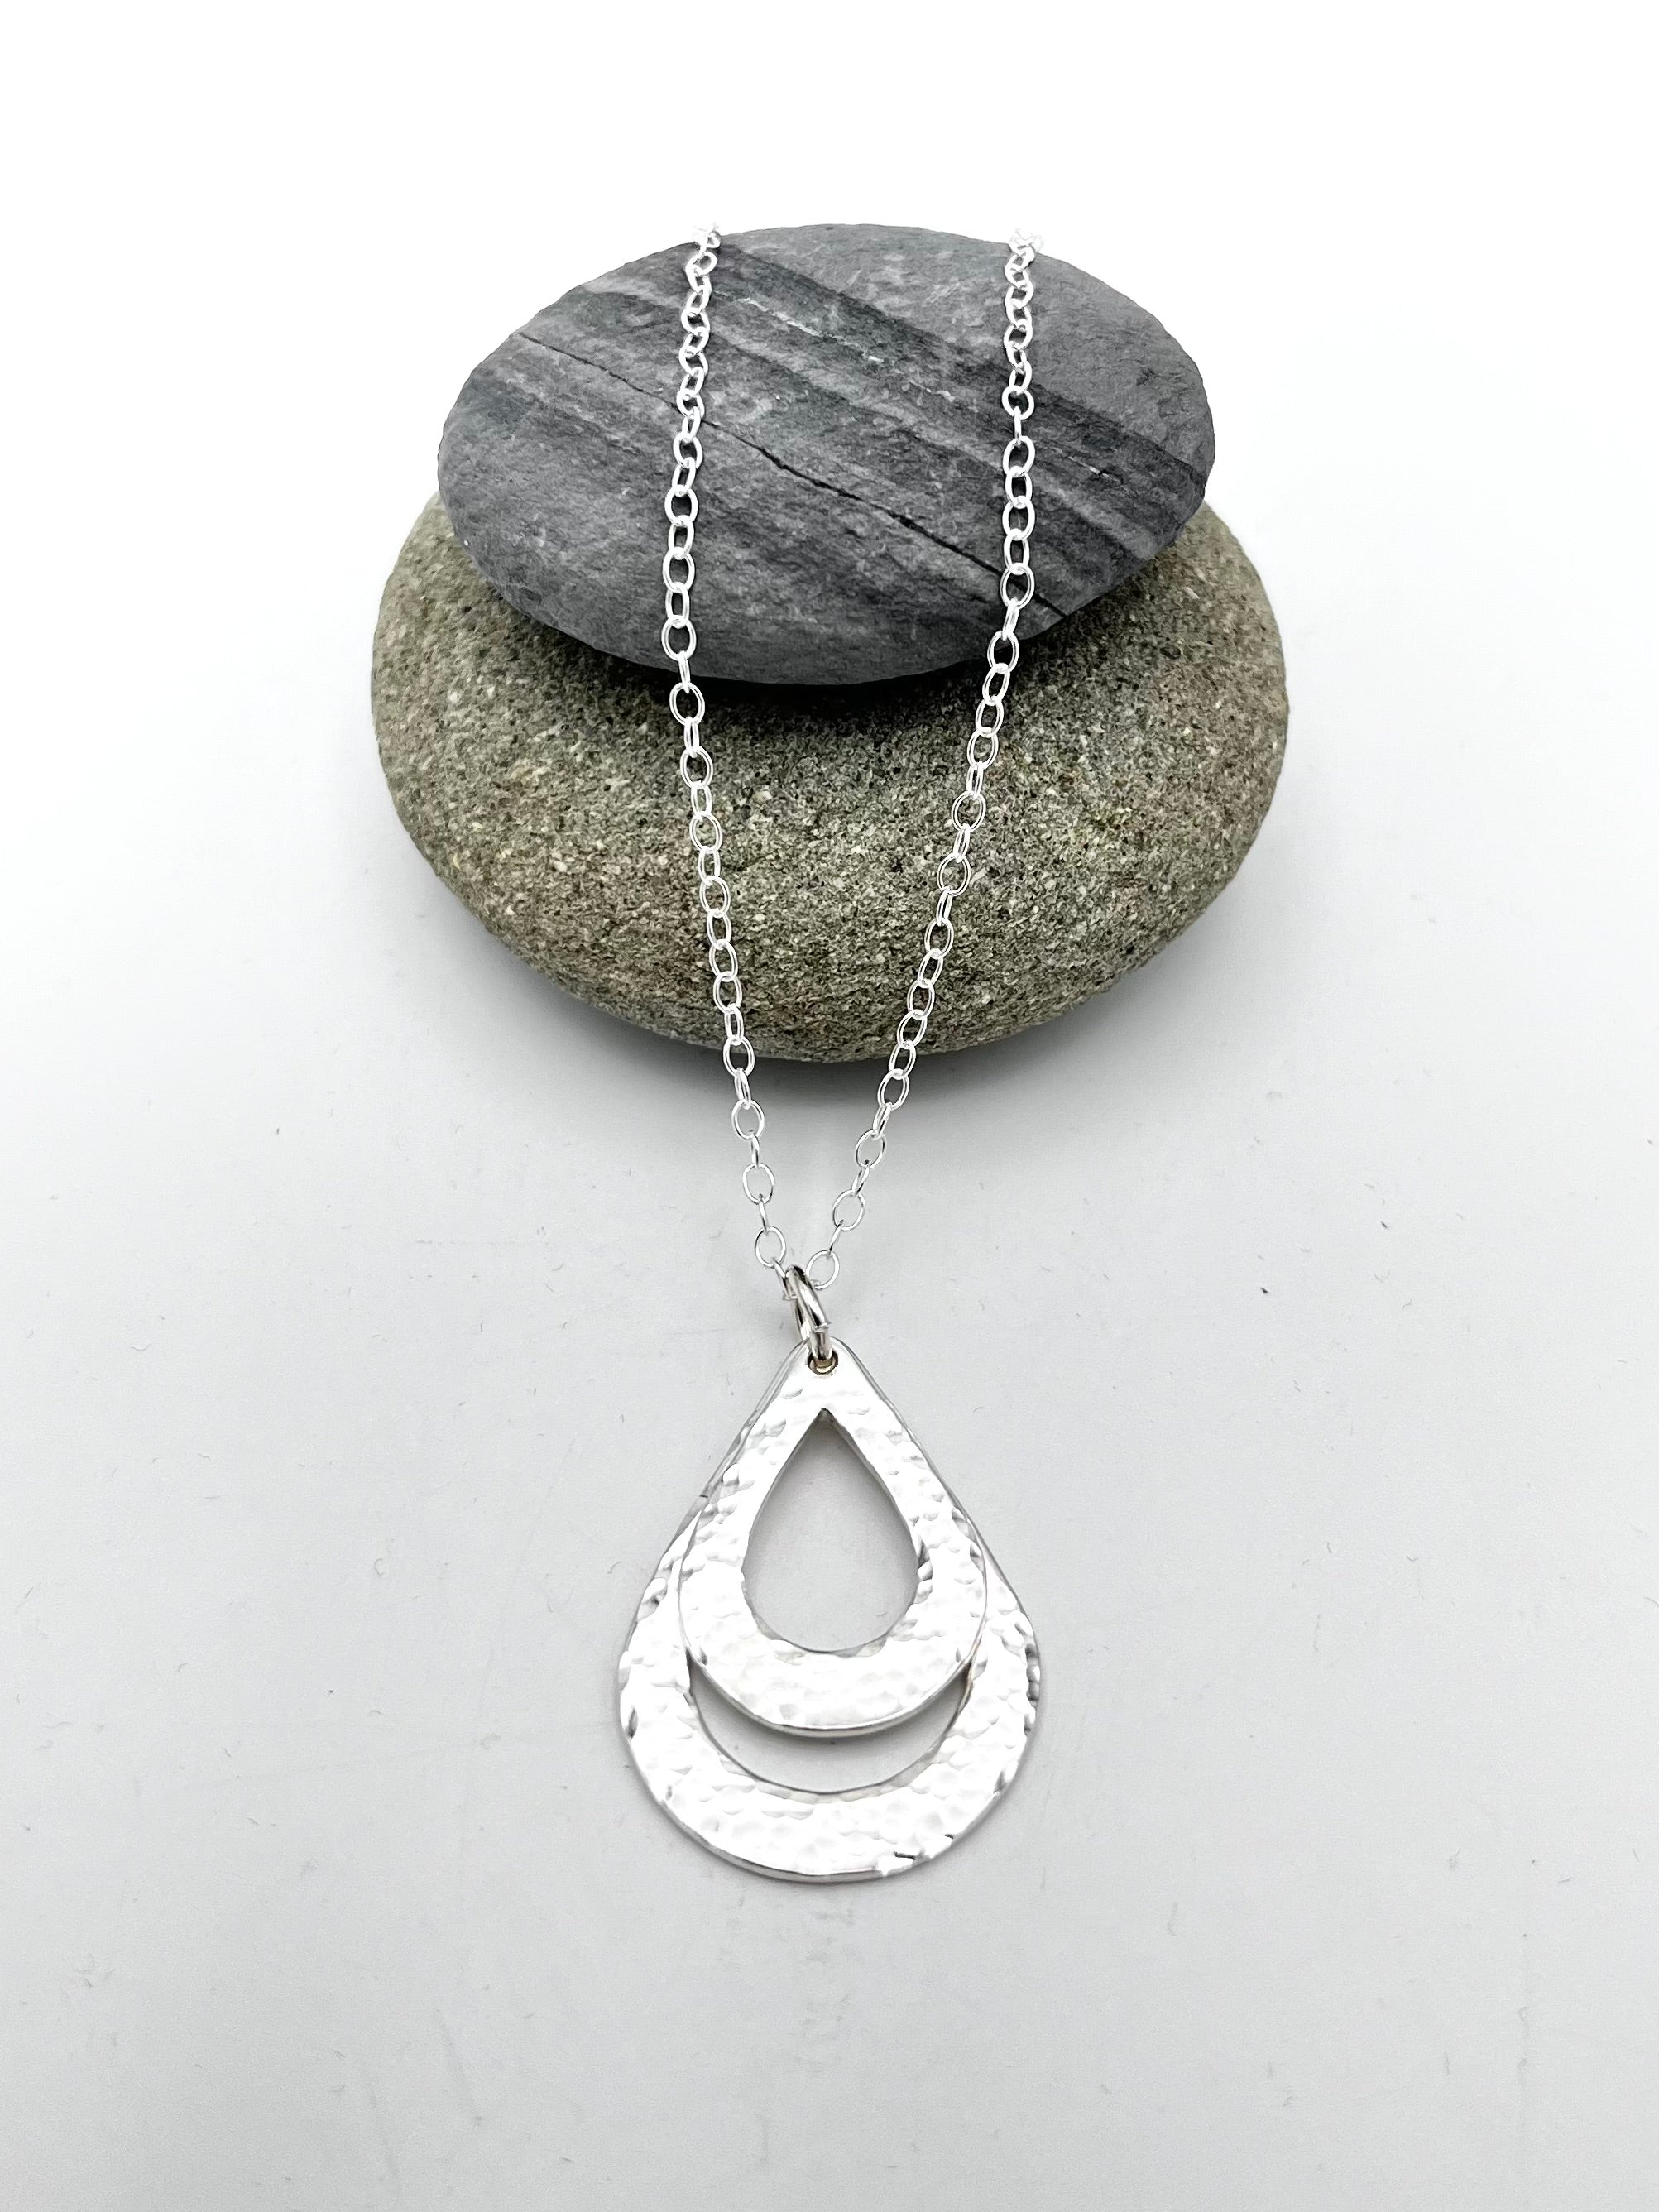 Double teardrop (Medium and small) pendant hammered finish on 16" trace chain